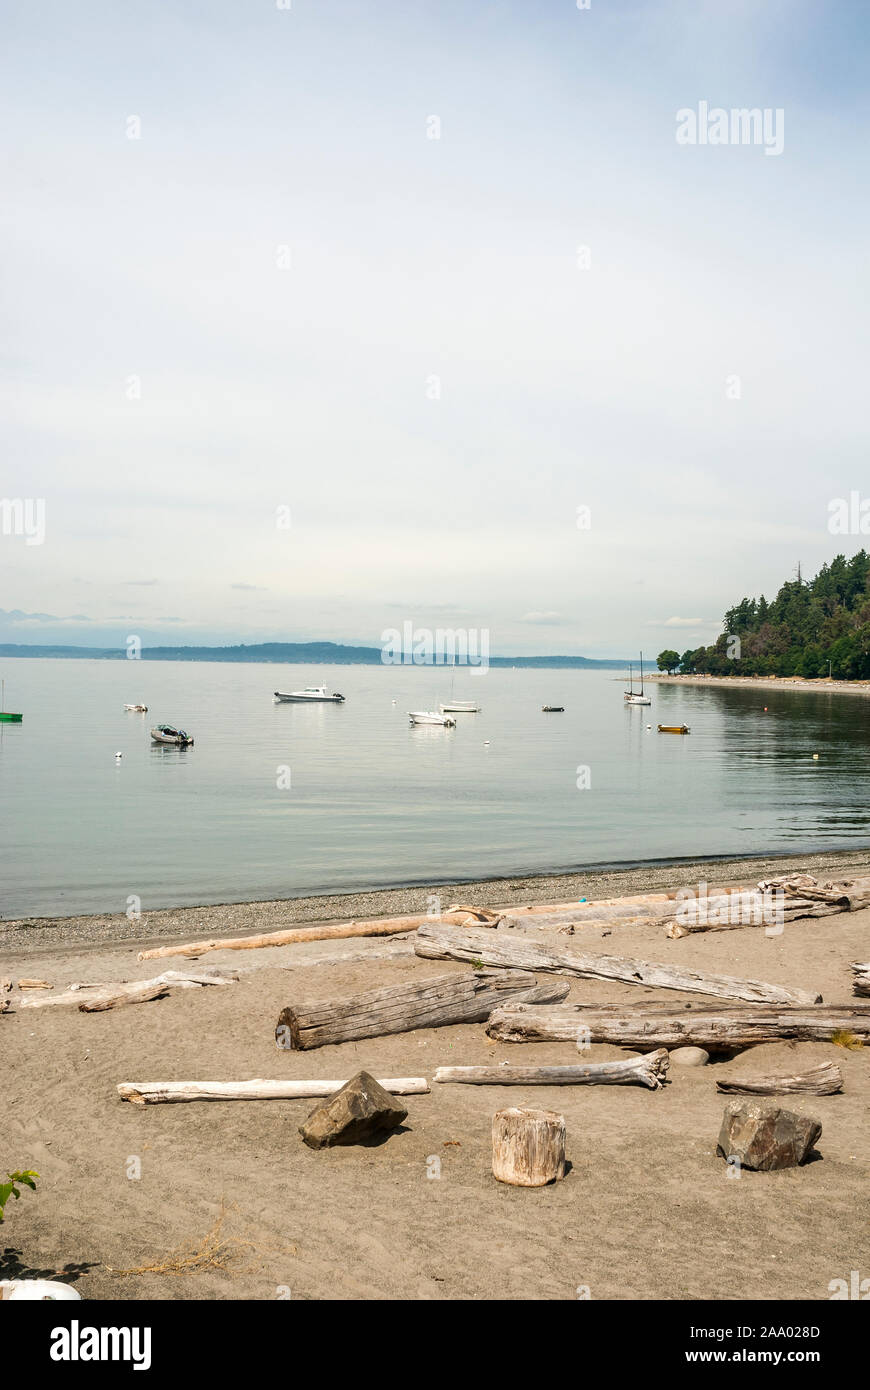 Driftwood on the sand on a beach and boats moored out in the water in West Seattle, Washington. Stock Photo